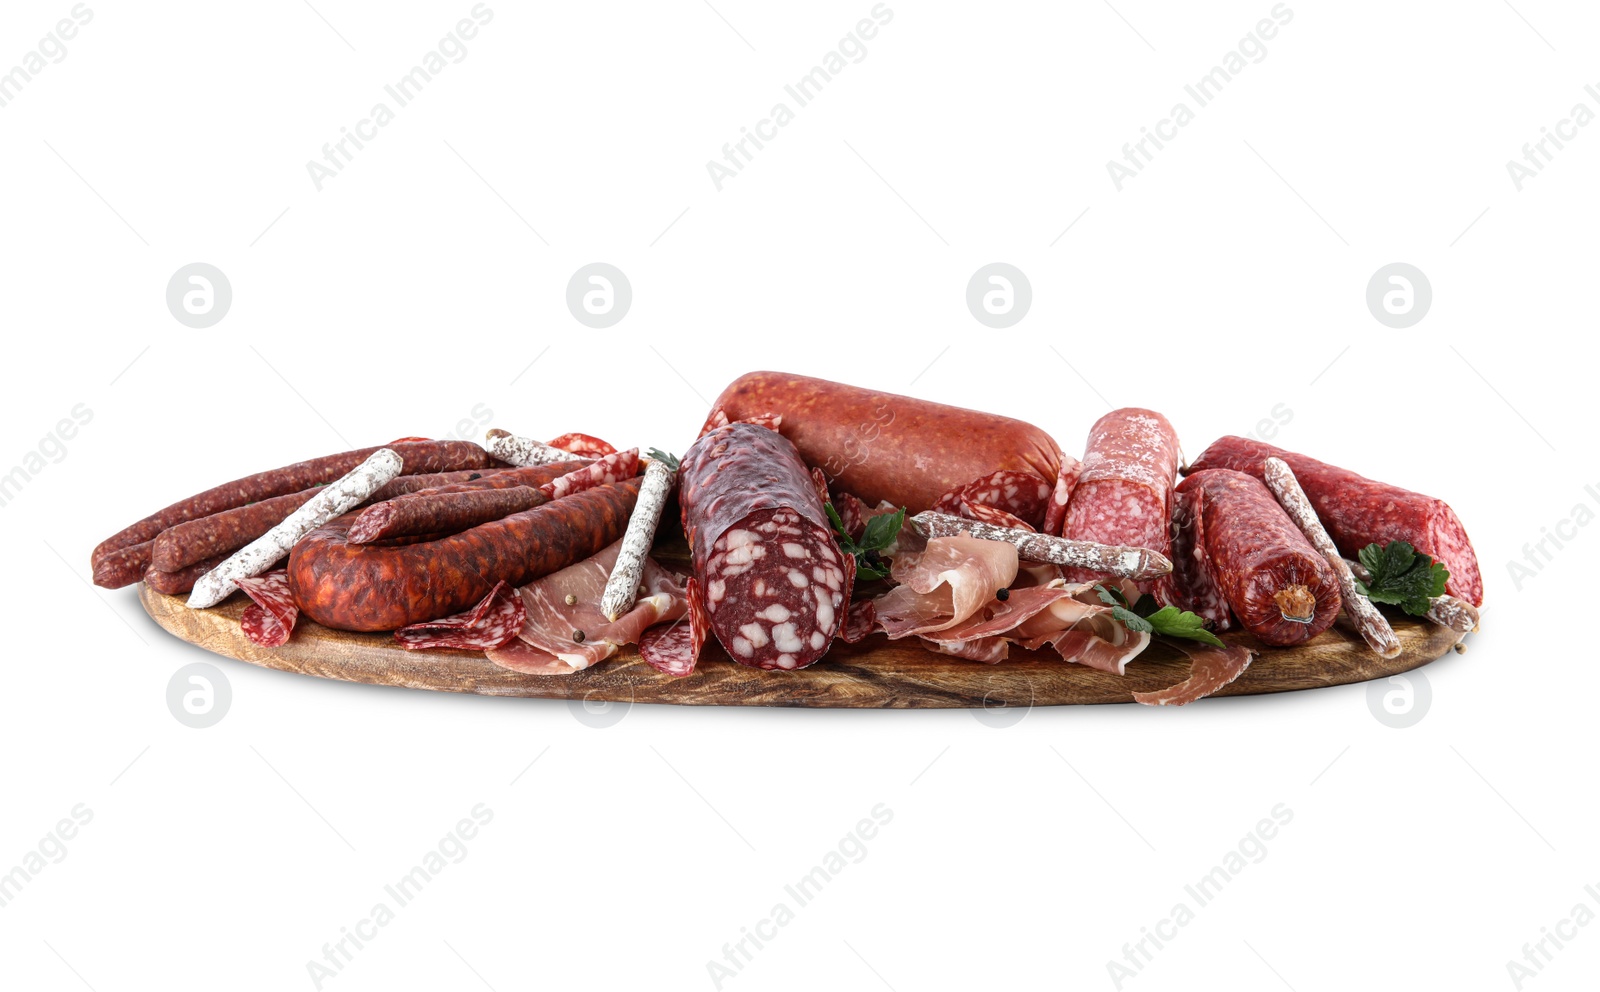 Photo of Different types of sausages with parsley served on board, white background